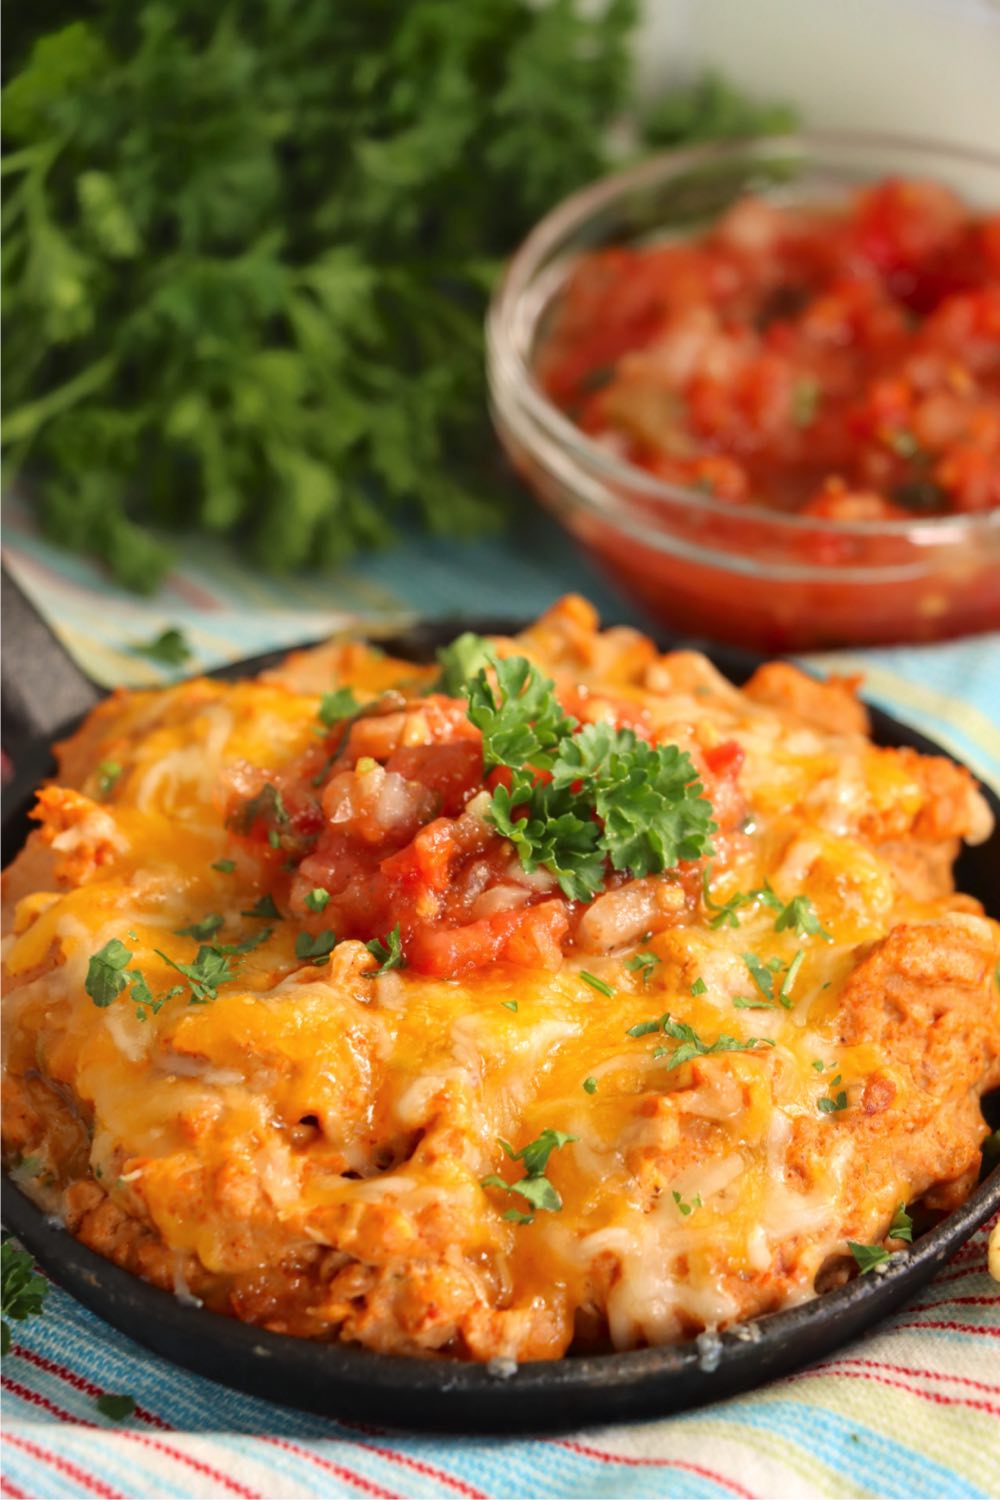 bean dip topped with tomatoes and parsley